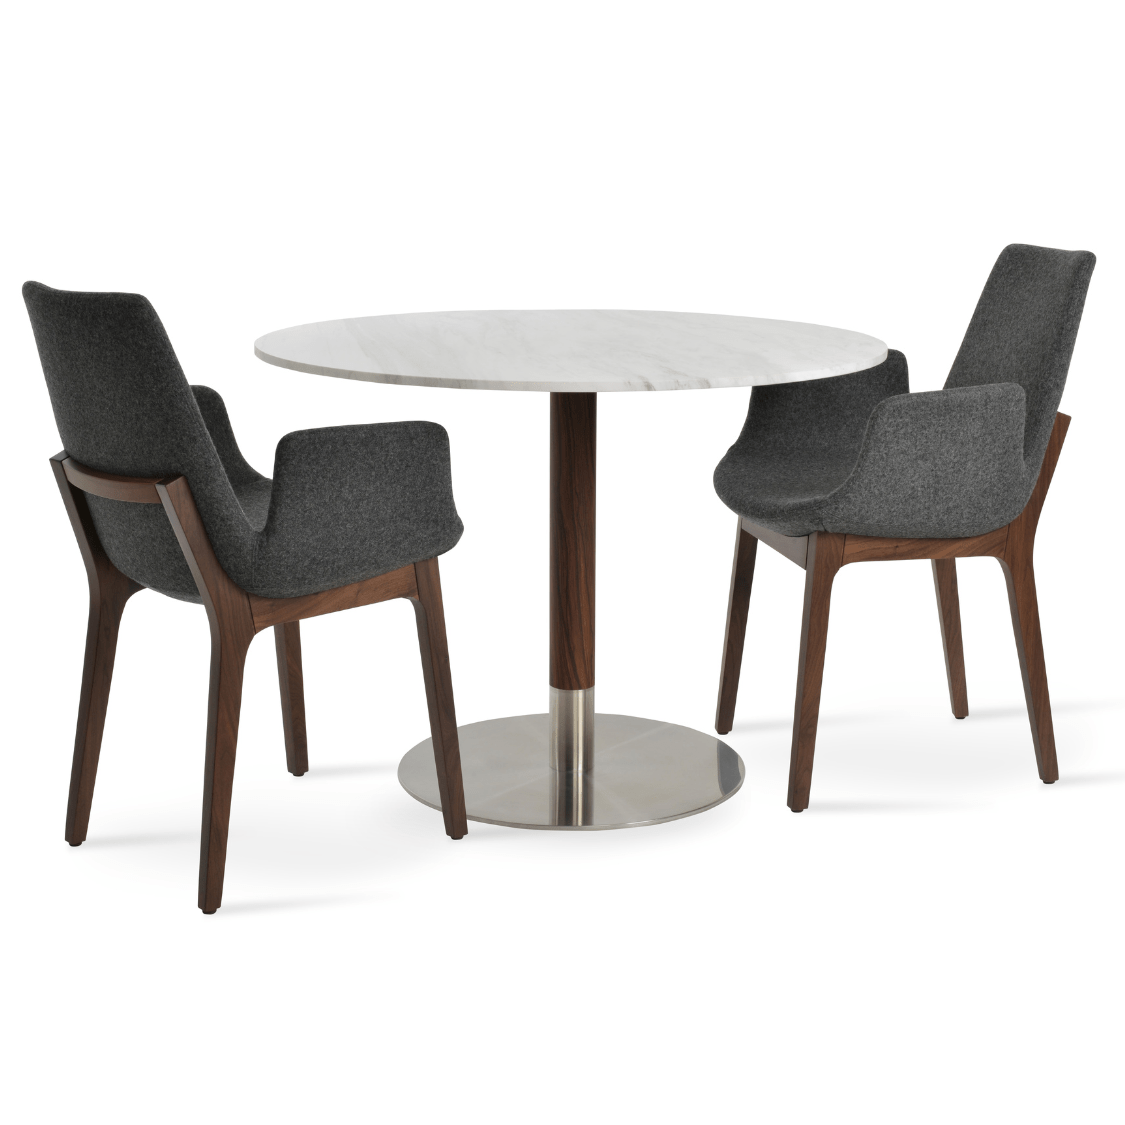 Upholstered Dining Chairs Eiffel Arm Grey - Your Bar Stools Canada